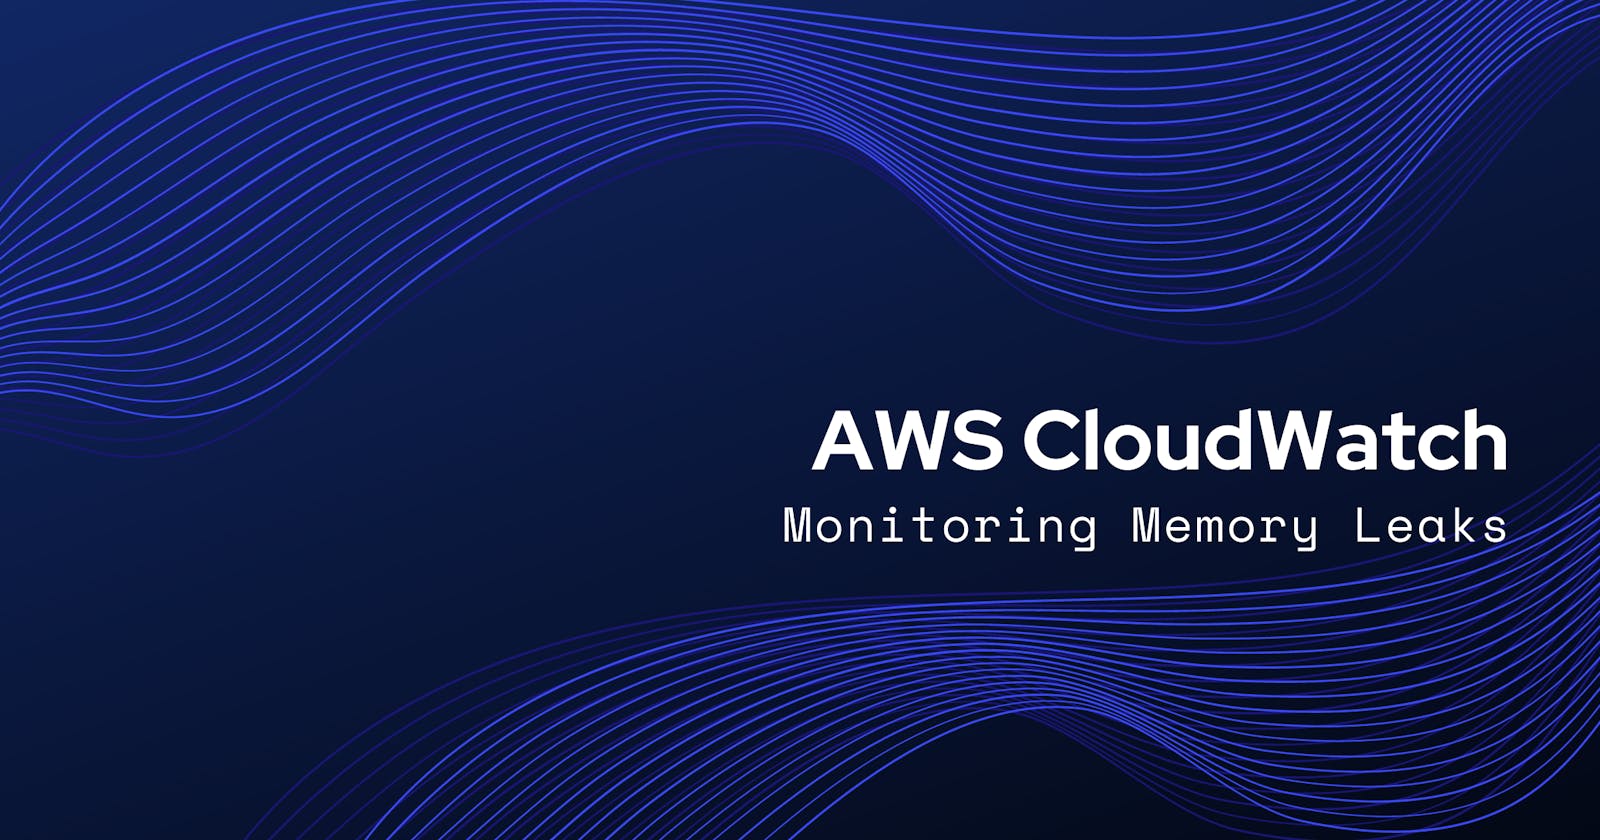 Monitoring Memory Leaks with AWS CloudWatch